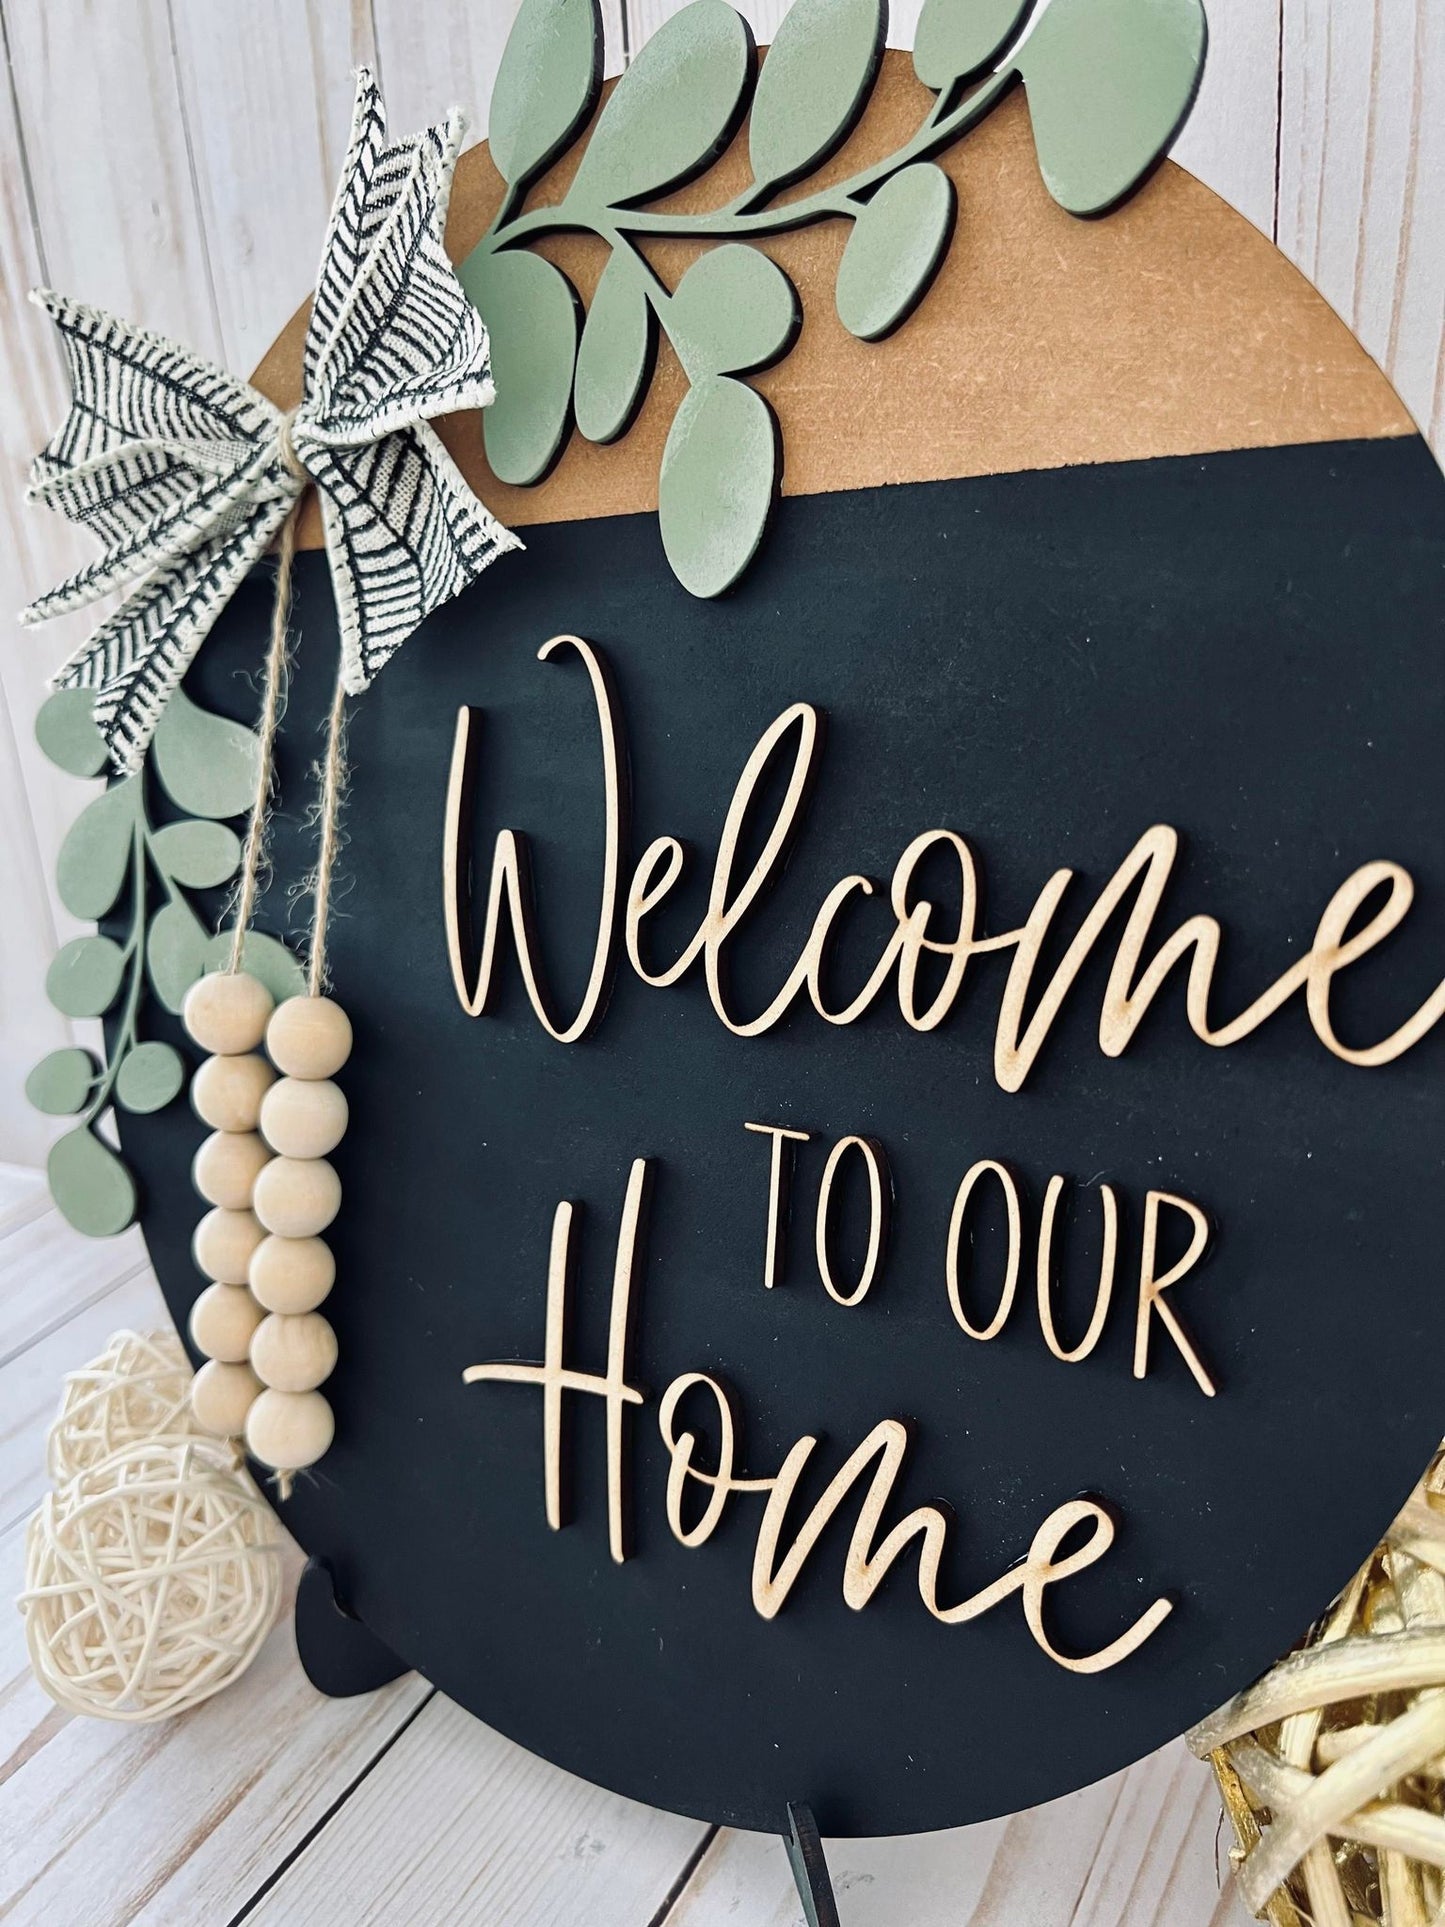 Welcome to Our Home - Ready to Paint Sign 10.7" Sign